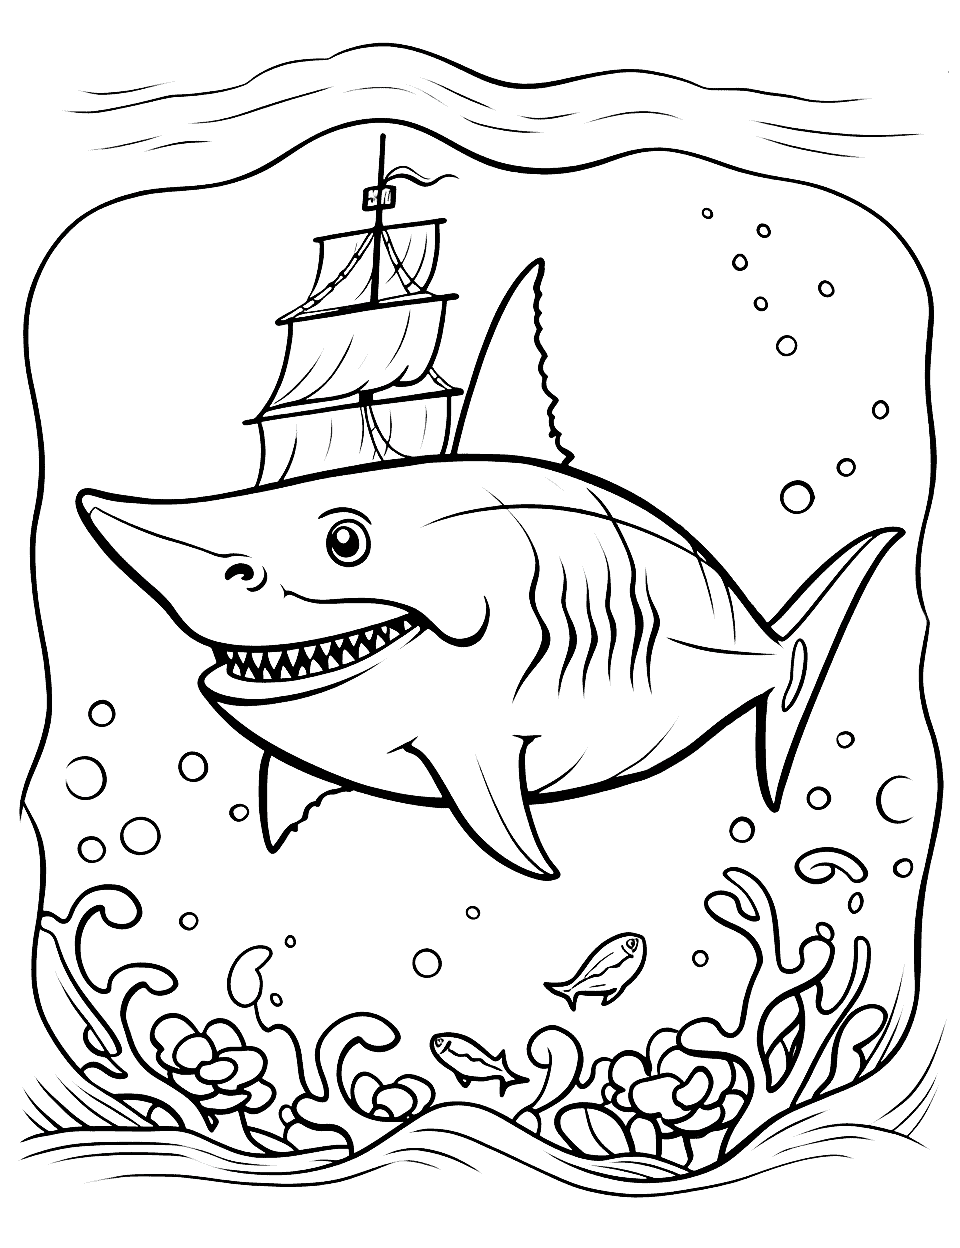 Shark Ship Coloring Page - A shark and a pirate ship combined.